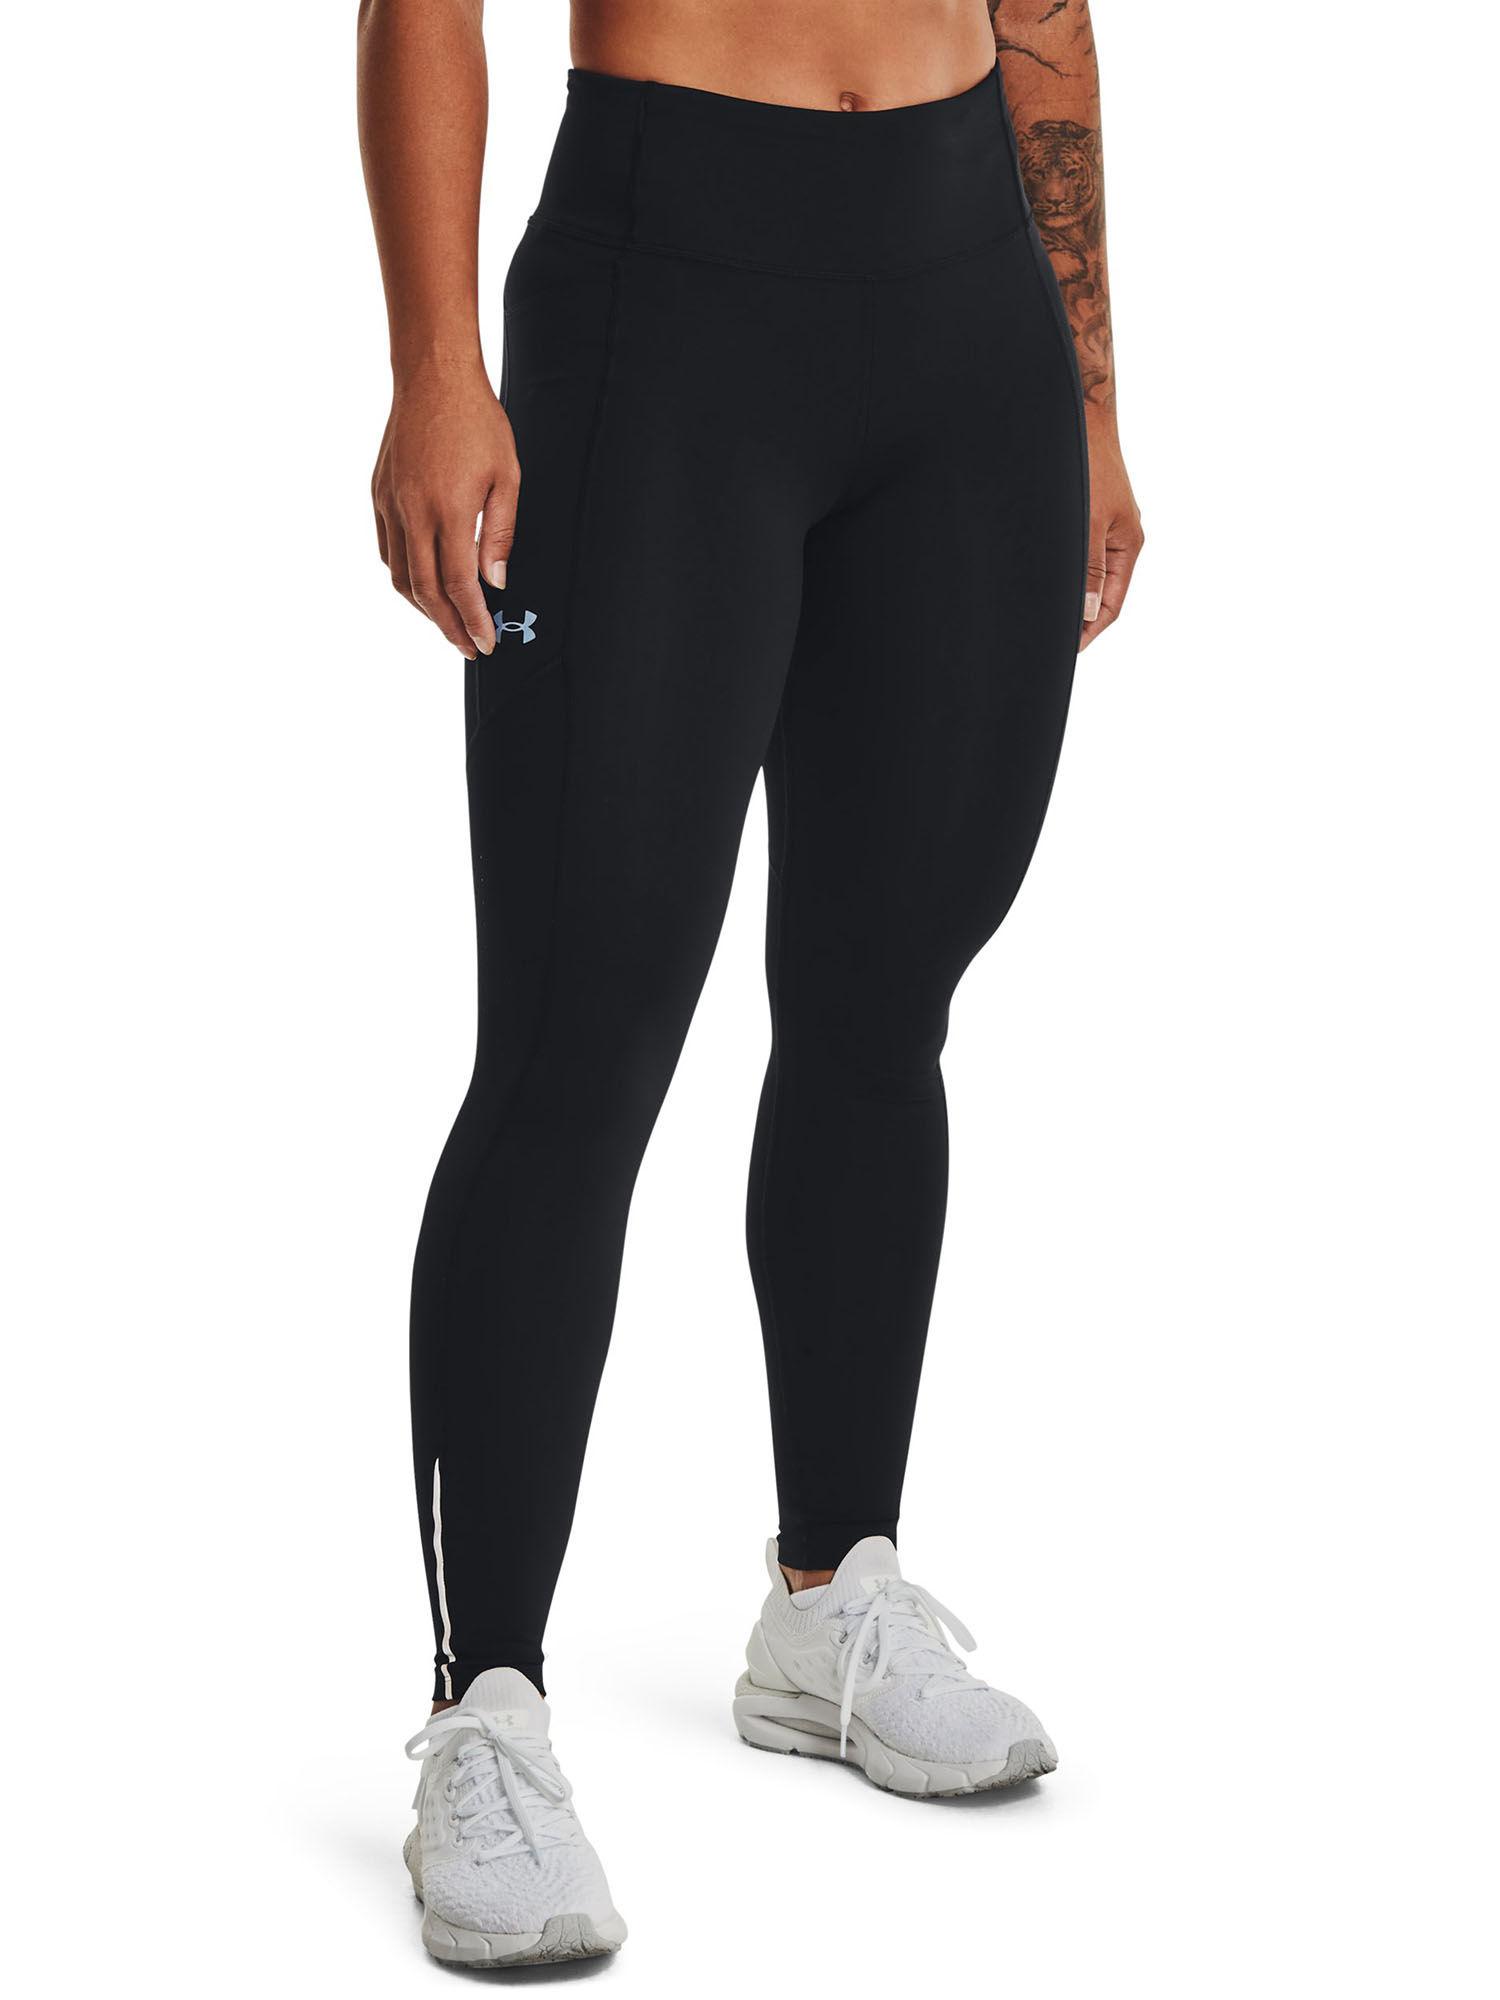 black fly fast tights